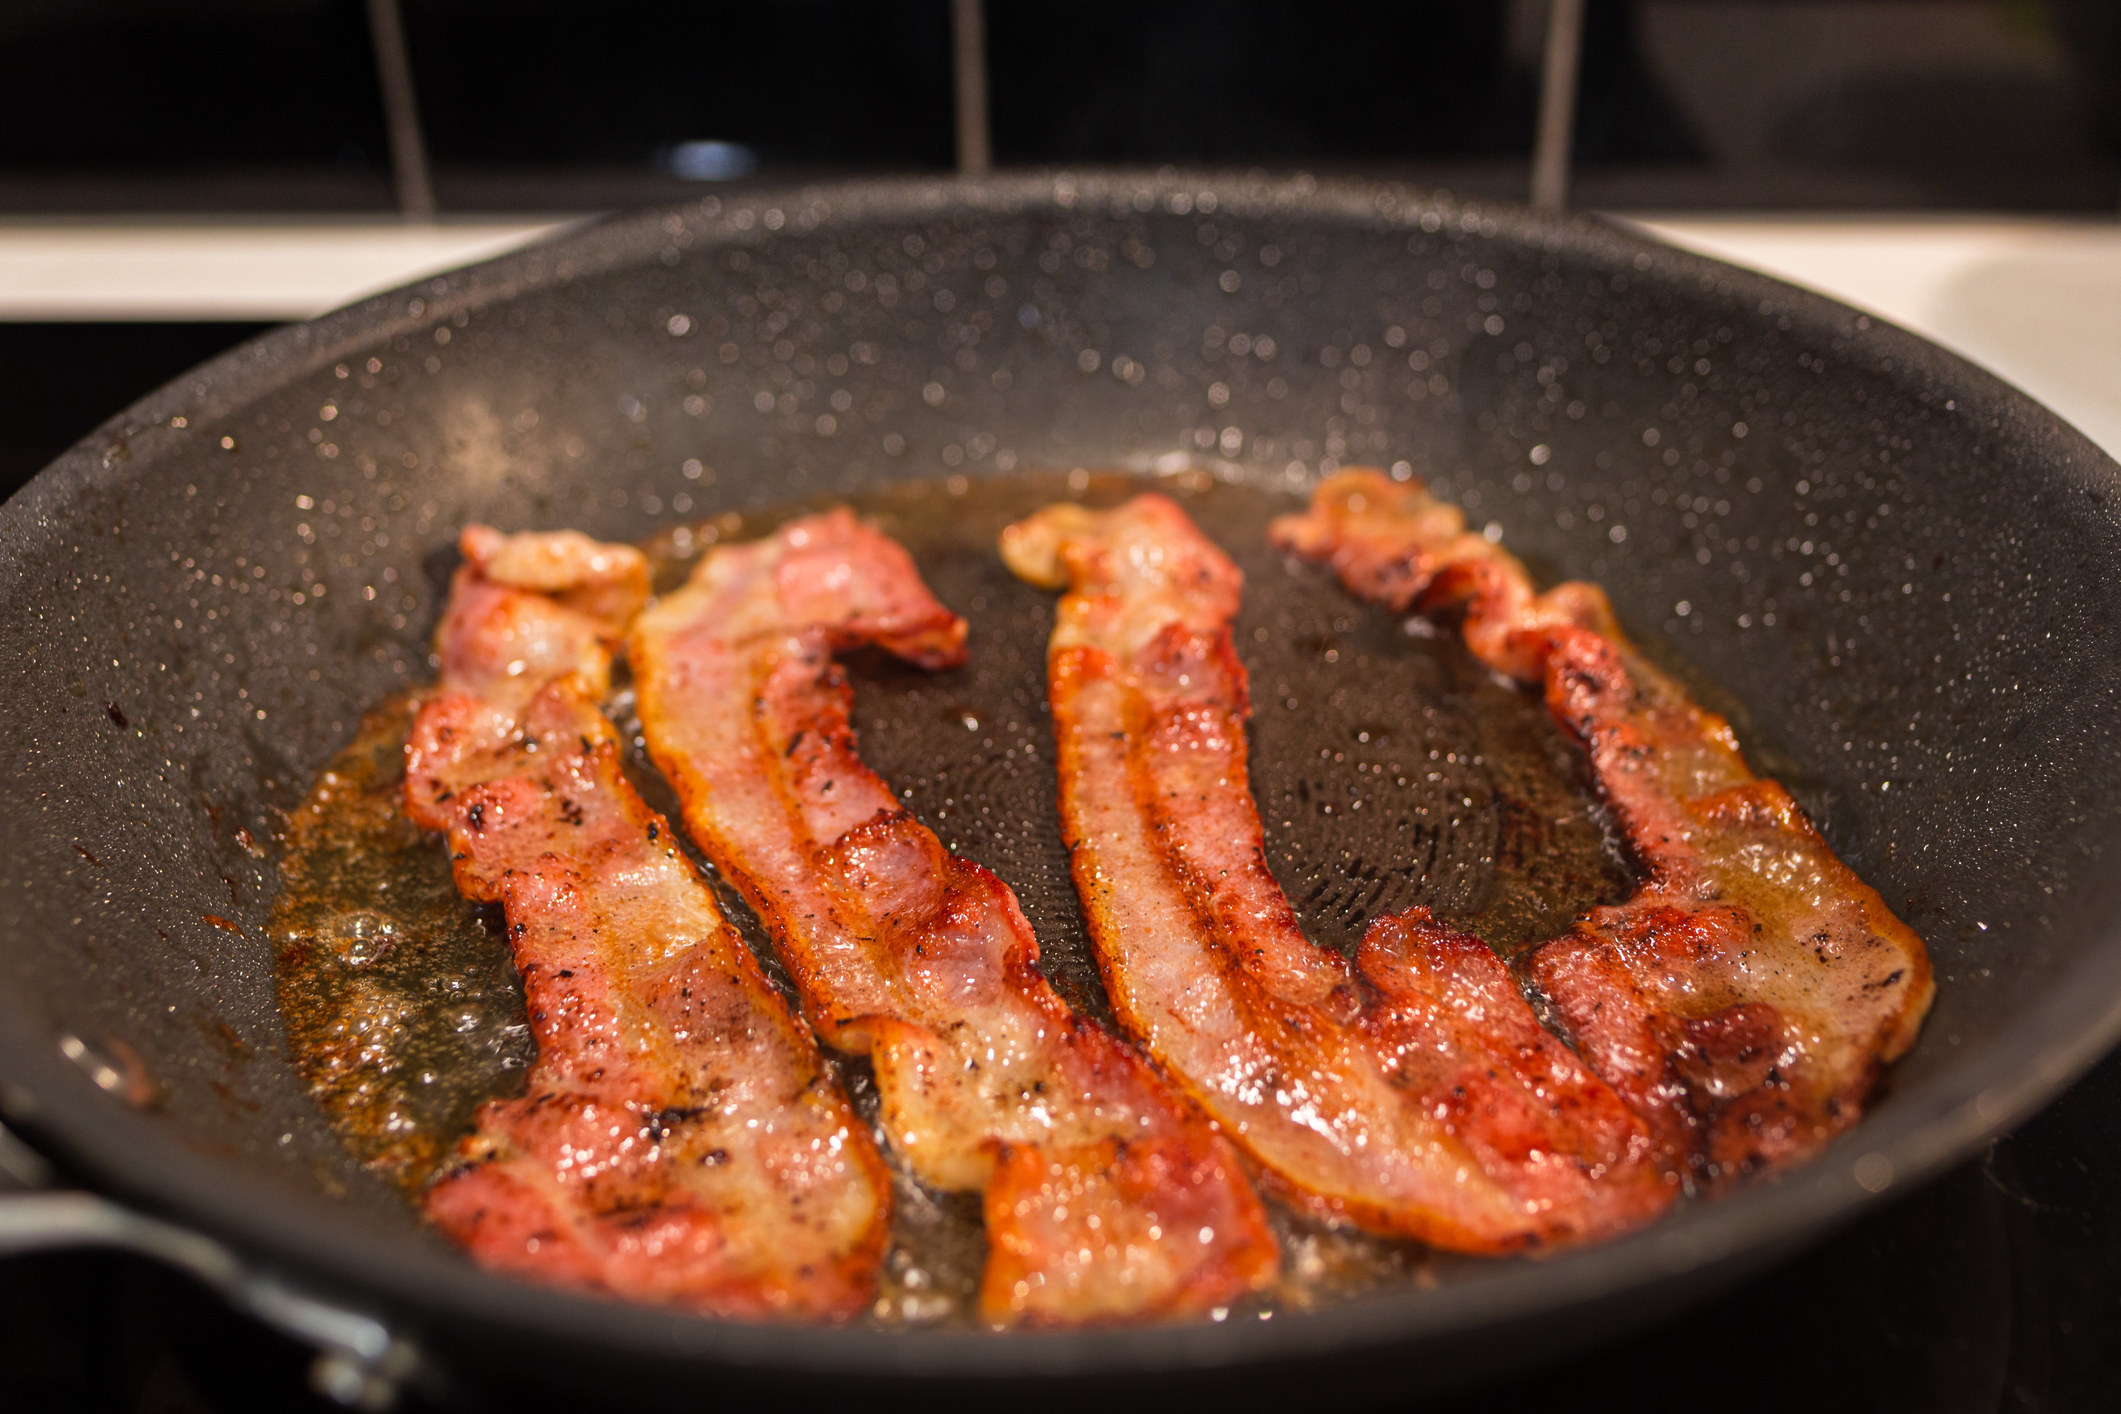 Bacon being fried in a skillet